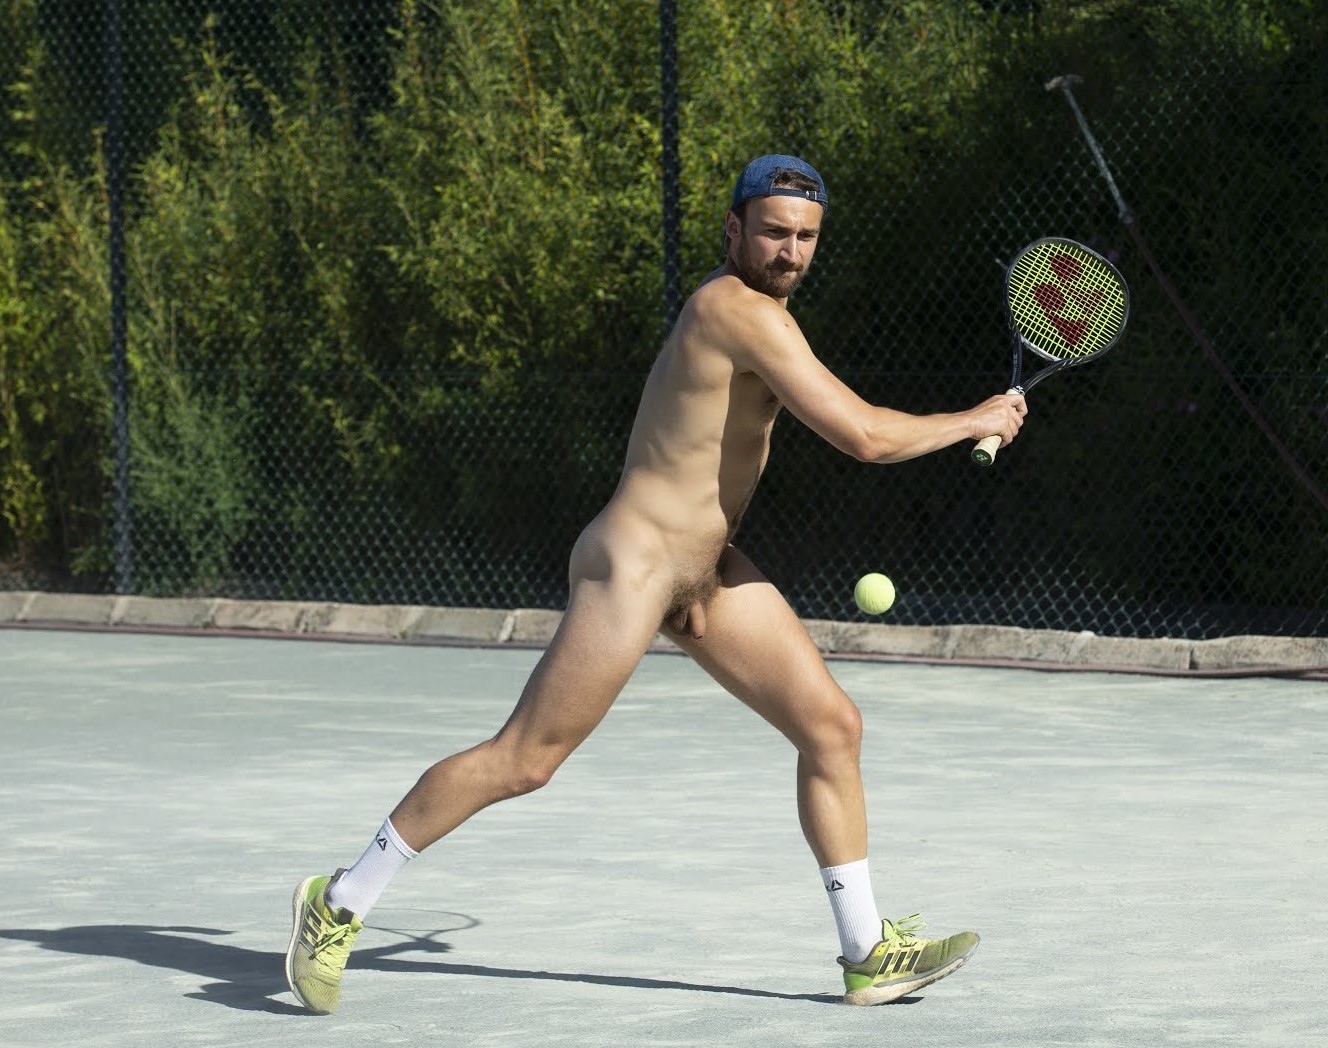 Nude male tennis player